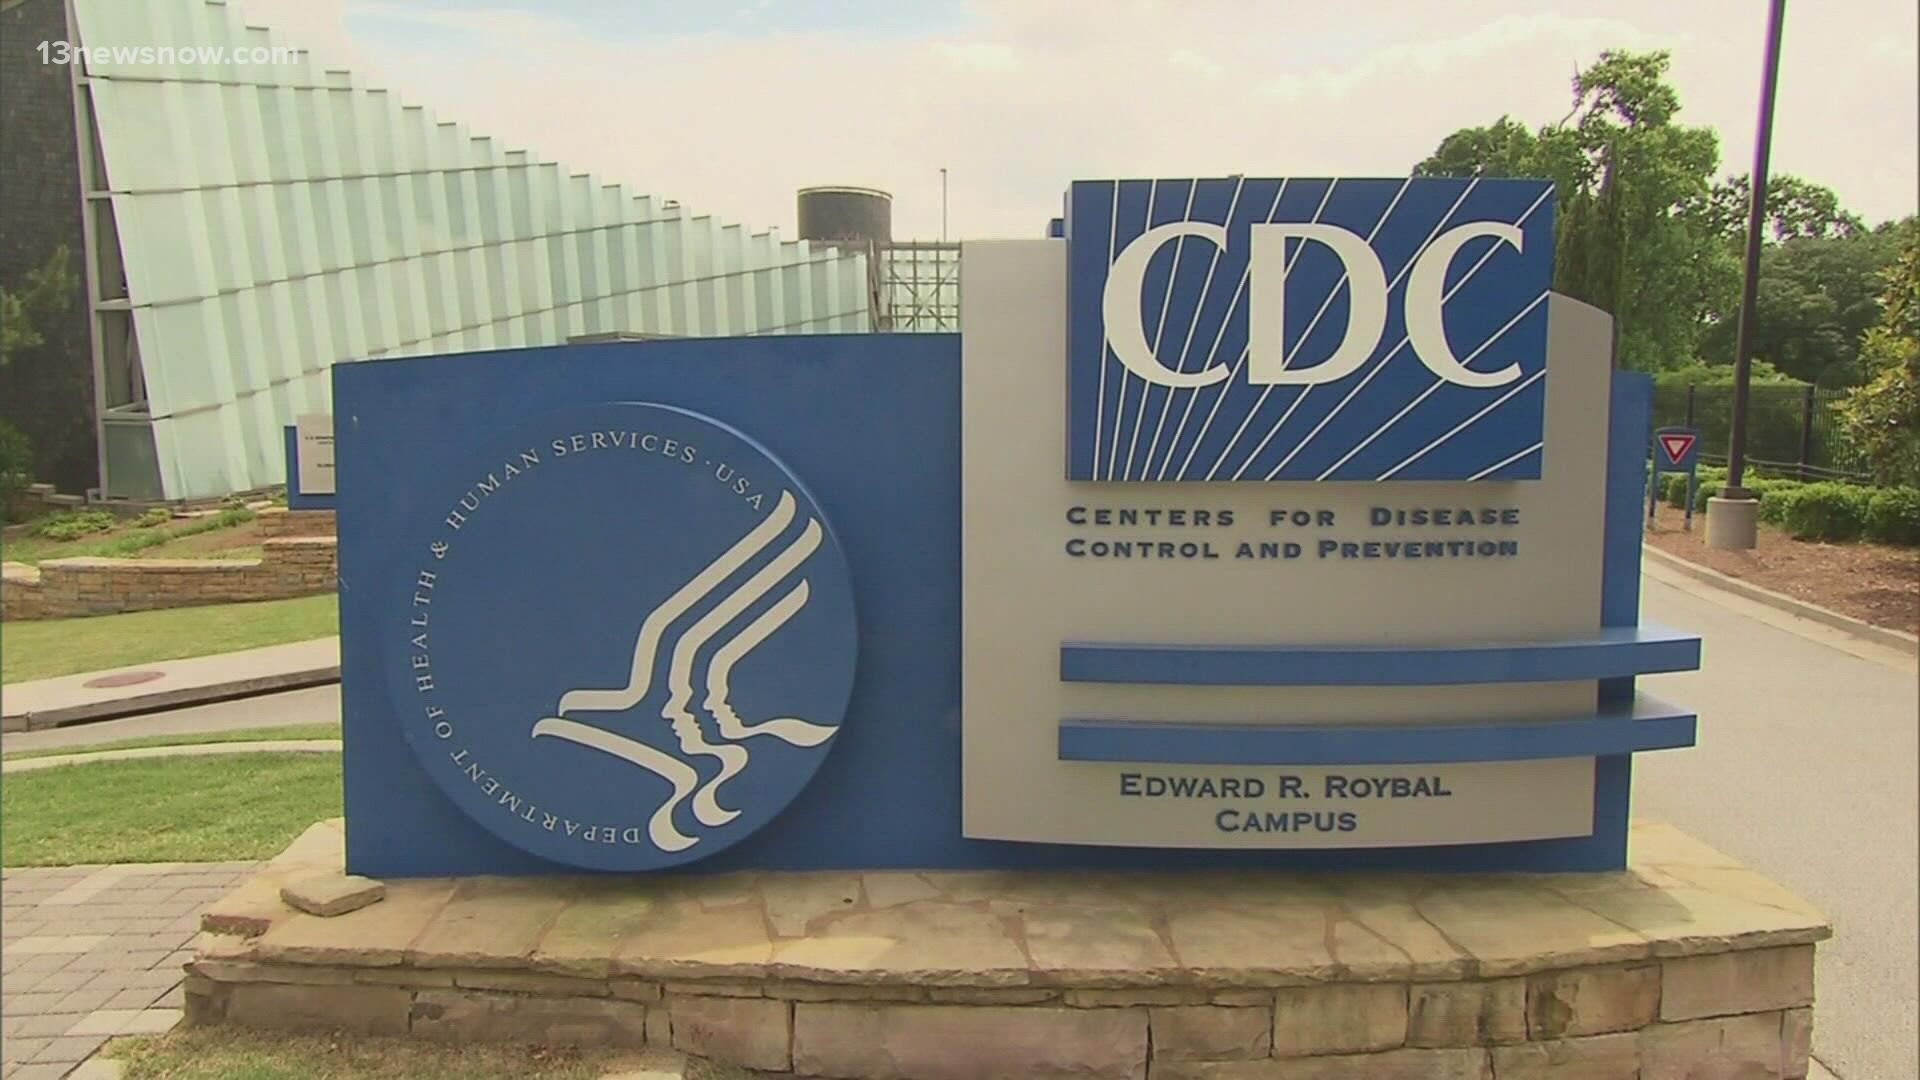 The CDC announced Friday they are looking into more than 100 cases of severe hepatitis, or liver issues among children. In the U.S., five children have died.